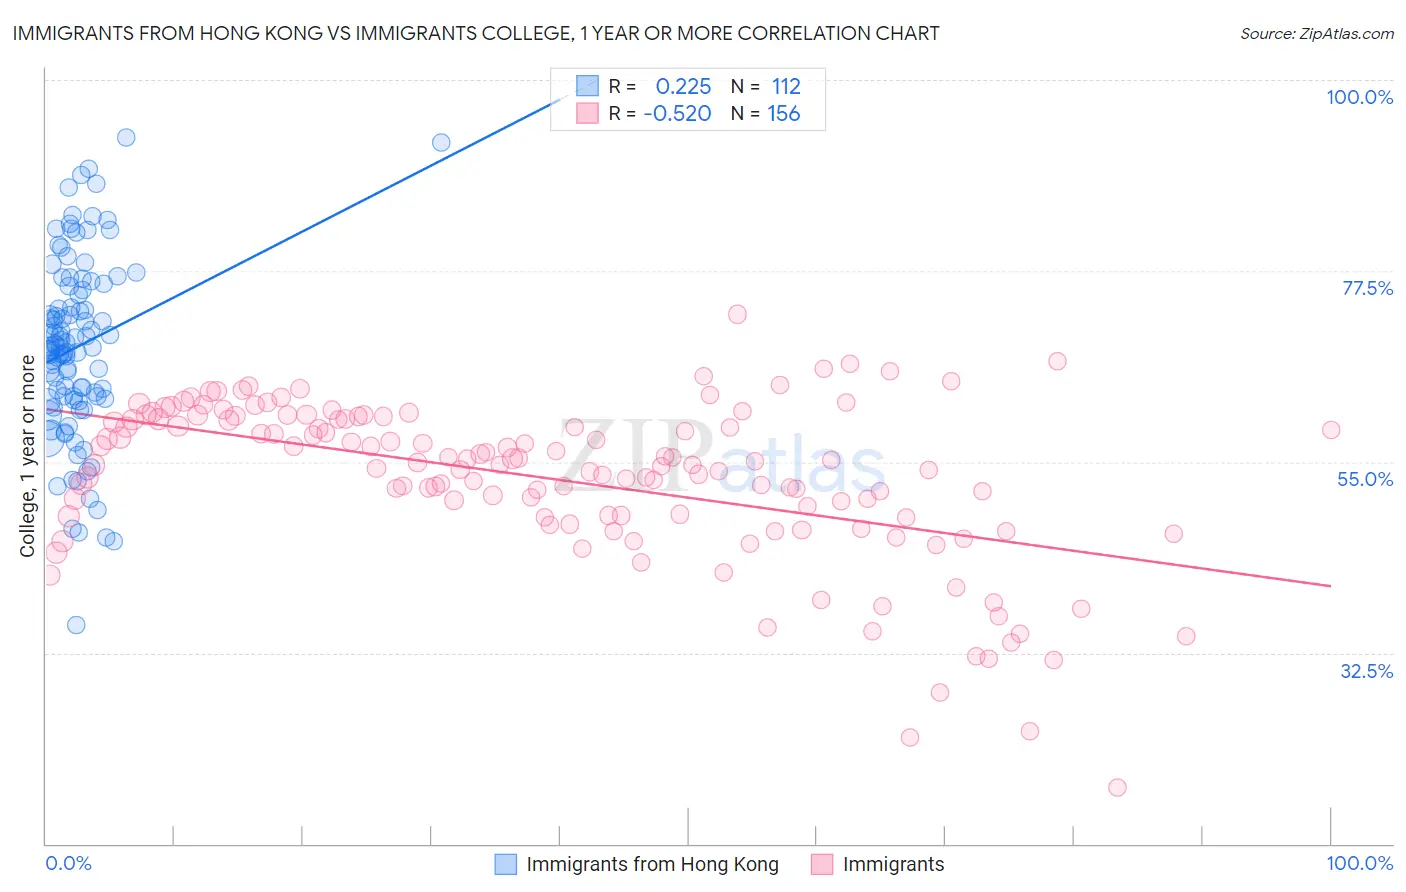 Immigrants from Hong Kong vs Immigrants College, 1 year or more